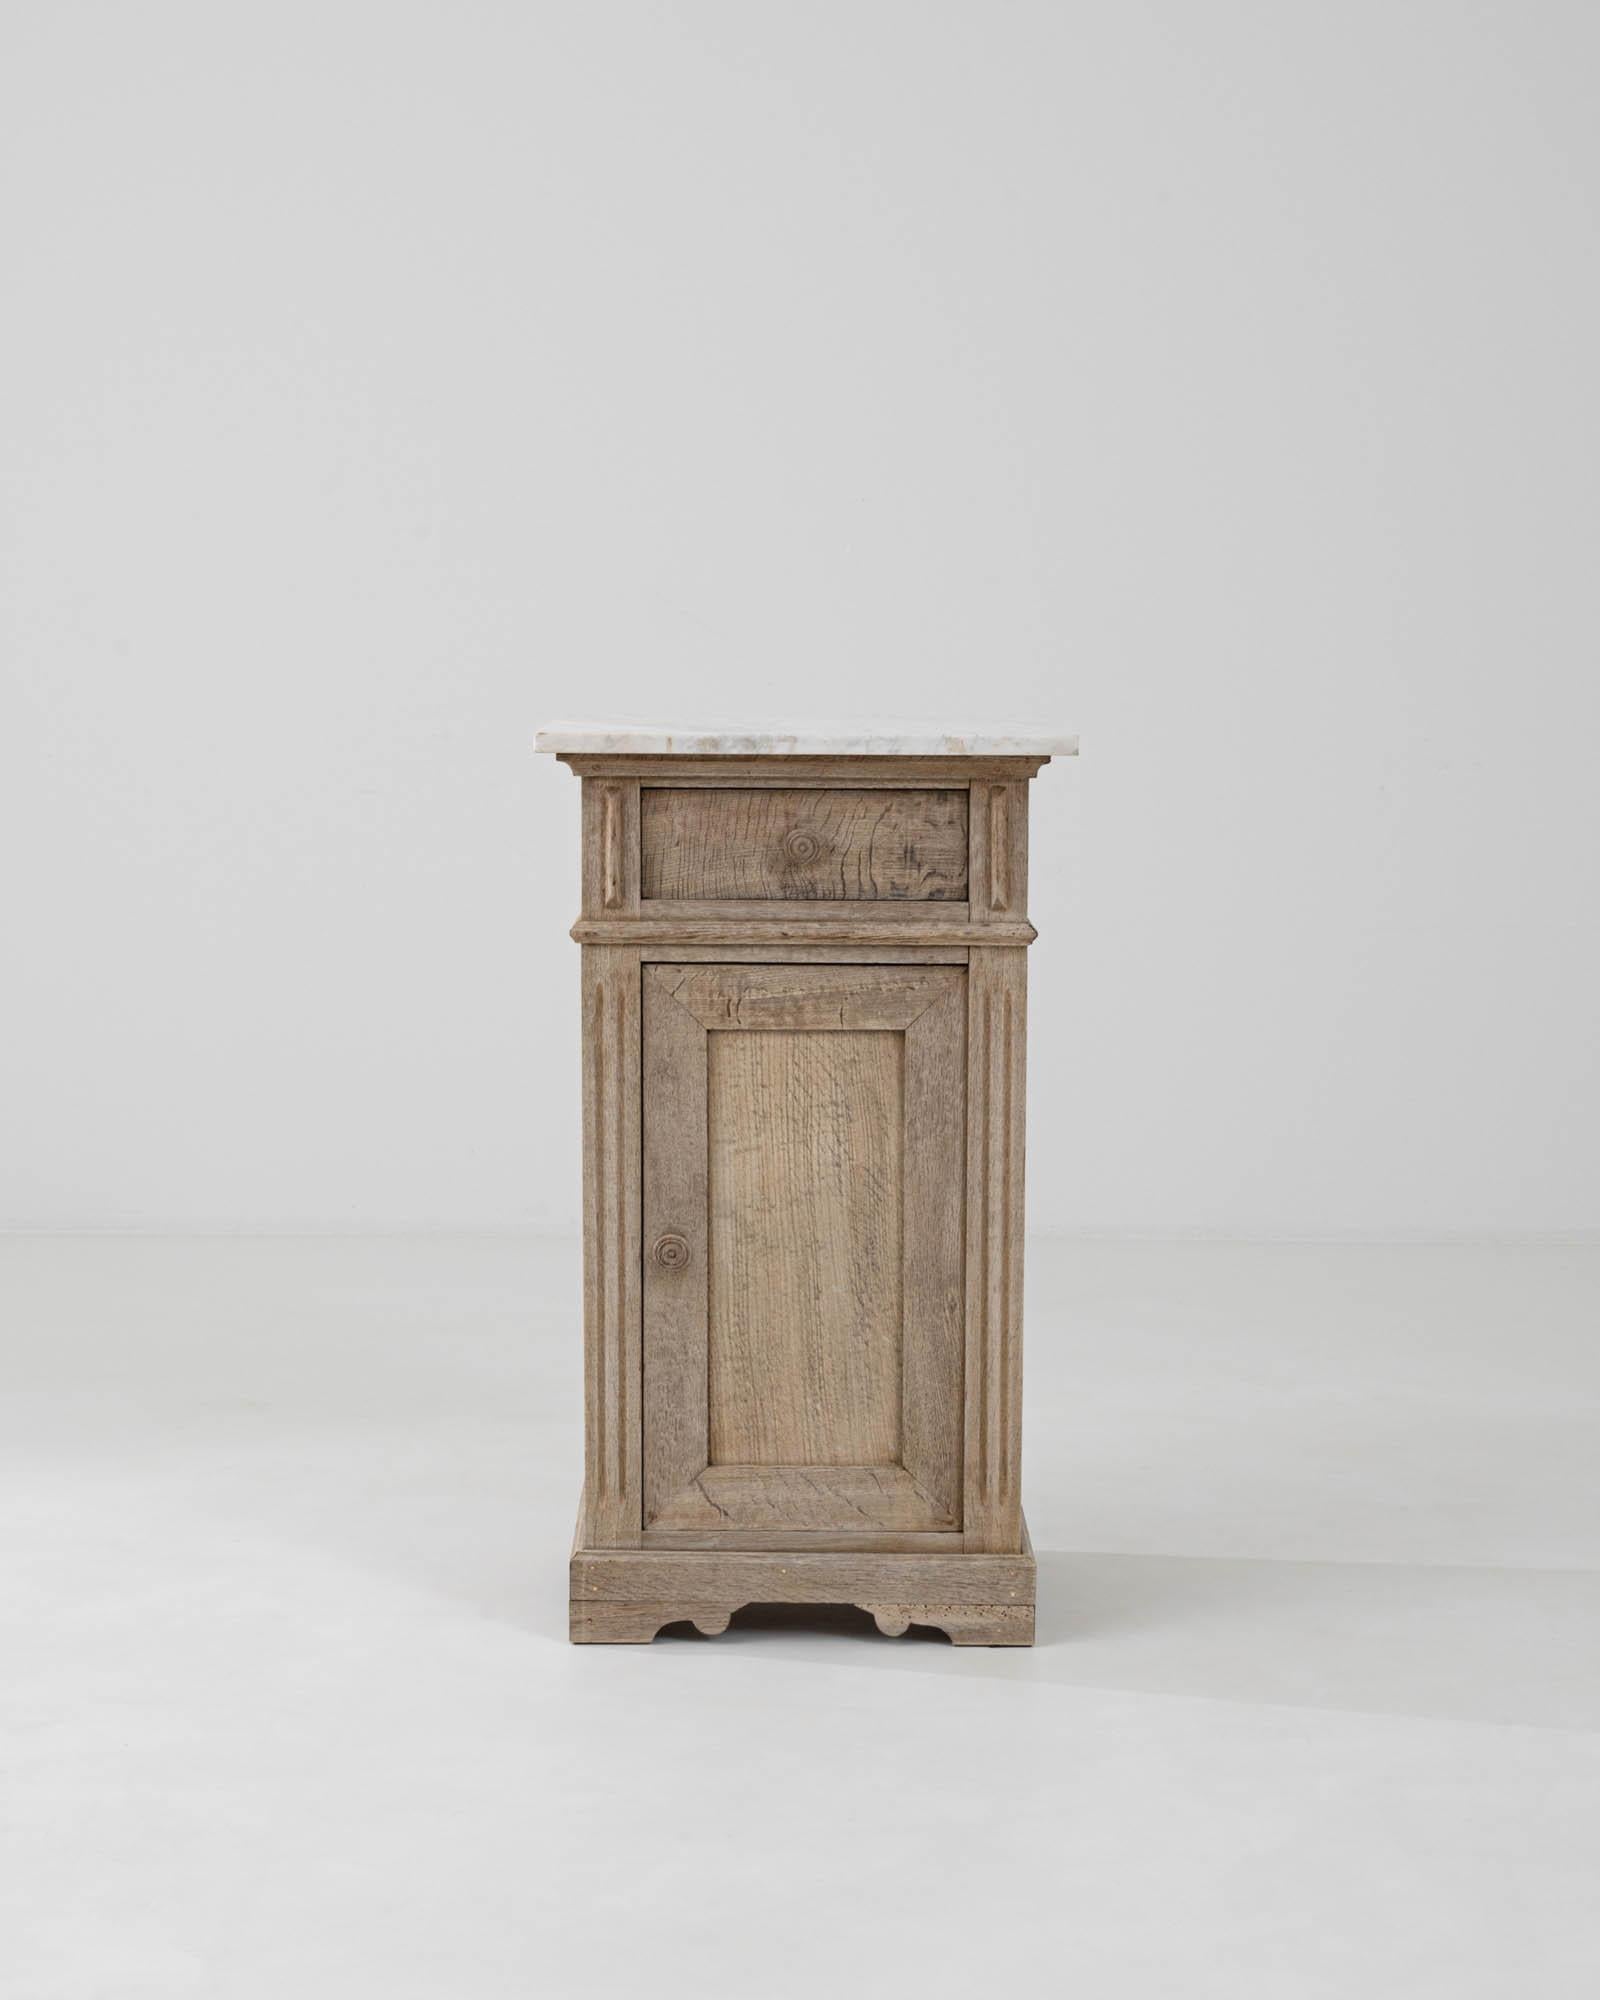 Step into the allure of provincial French design with our 1900s French Bleached Oak Bedside Table, topped with a luxurious slab of marble. The rustic elegance of the weathered oak provides a delightful contrast to the cool, polished marble, uniting